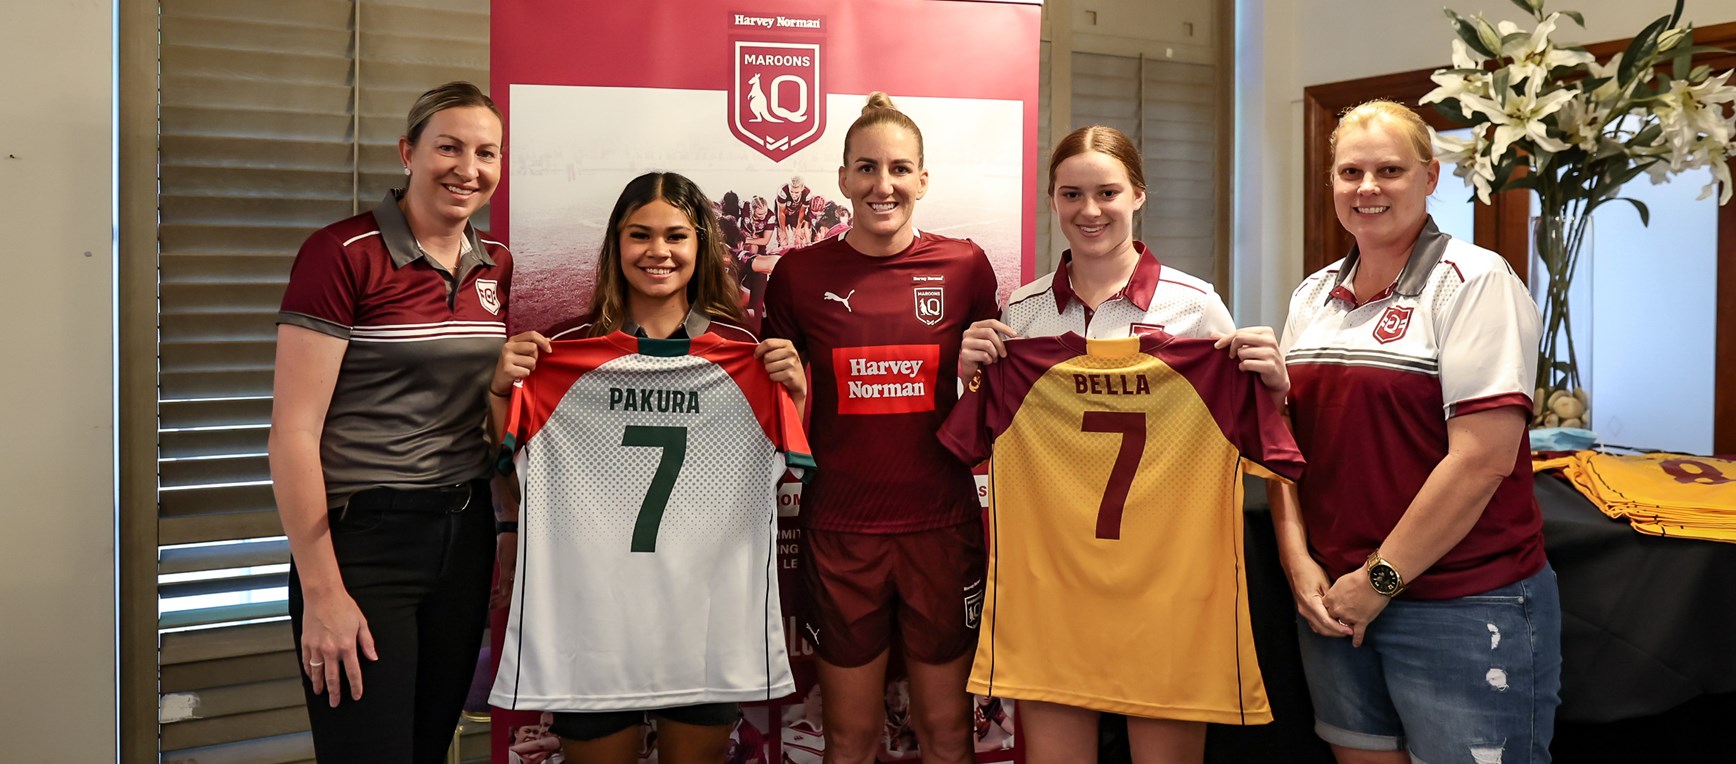 In pictures: Brigginshaw presents City and Country girls with their jerseys